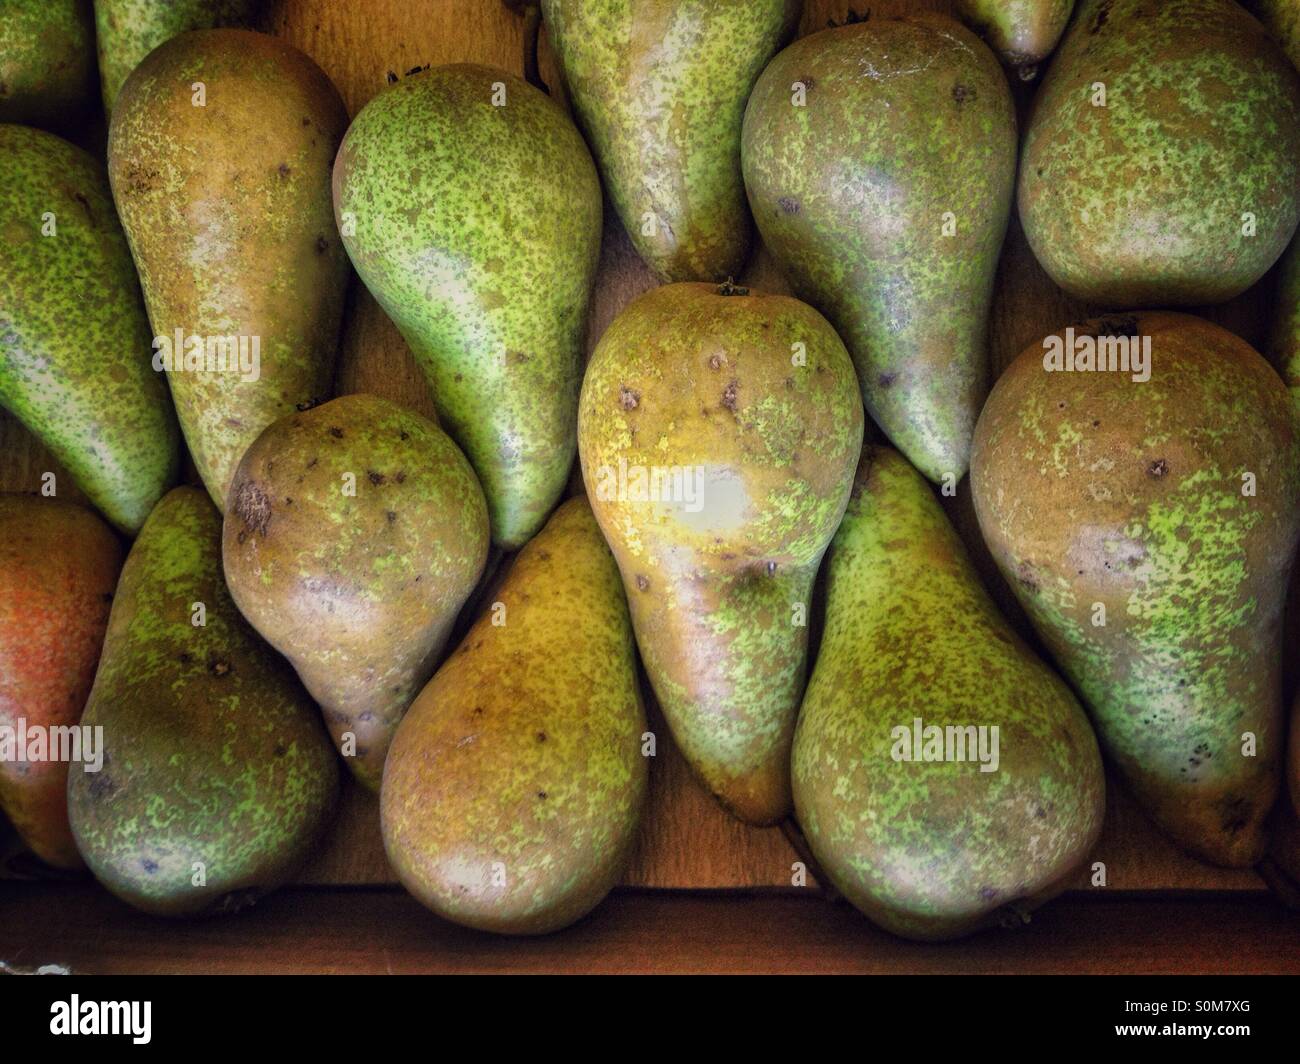 Conference pears Stock Photo